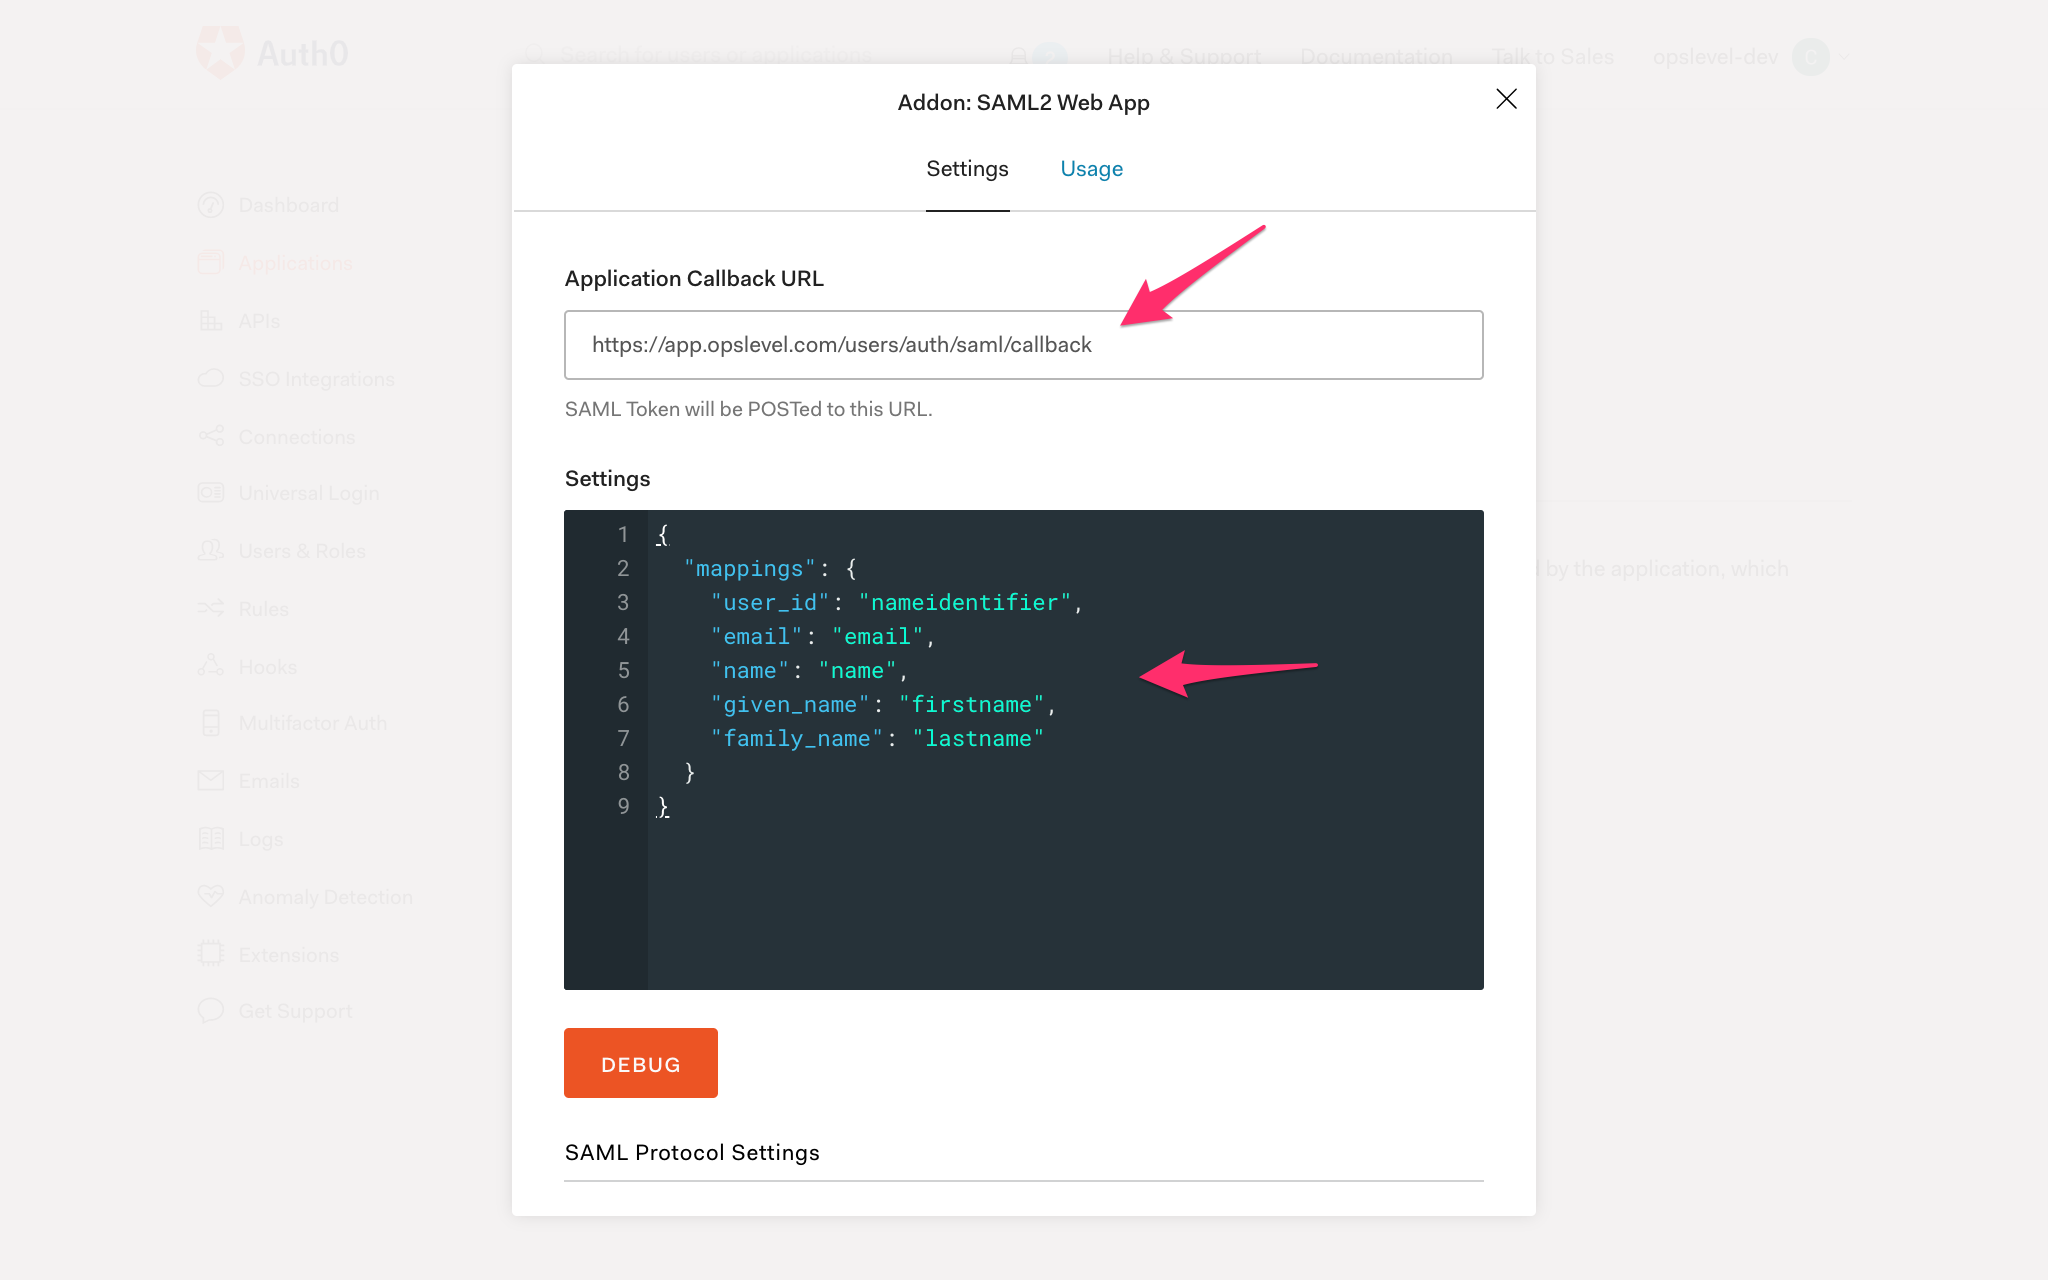 Completed Auth0 SAML2 Settings form